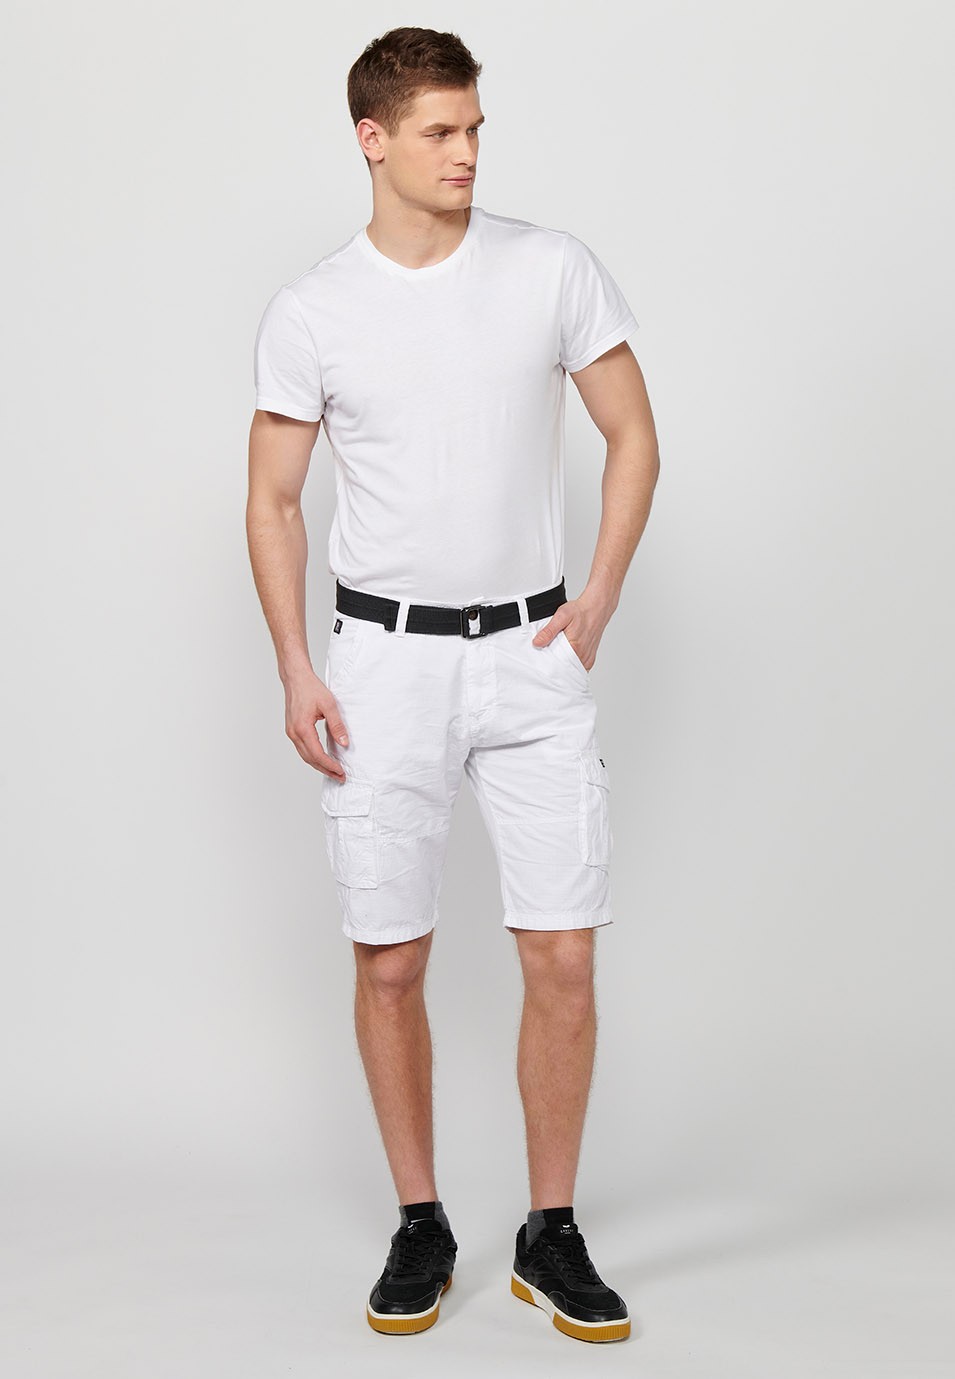 Cotton cargo shorts with belt and front closure with zipper and button with pockets, two back pockets with flap and two cargo pants in White for Men